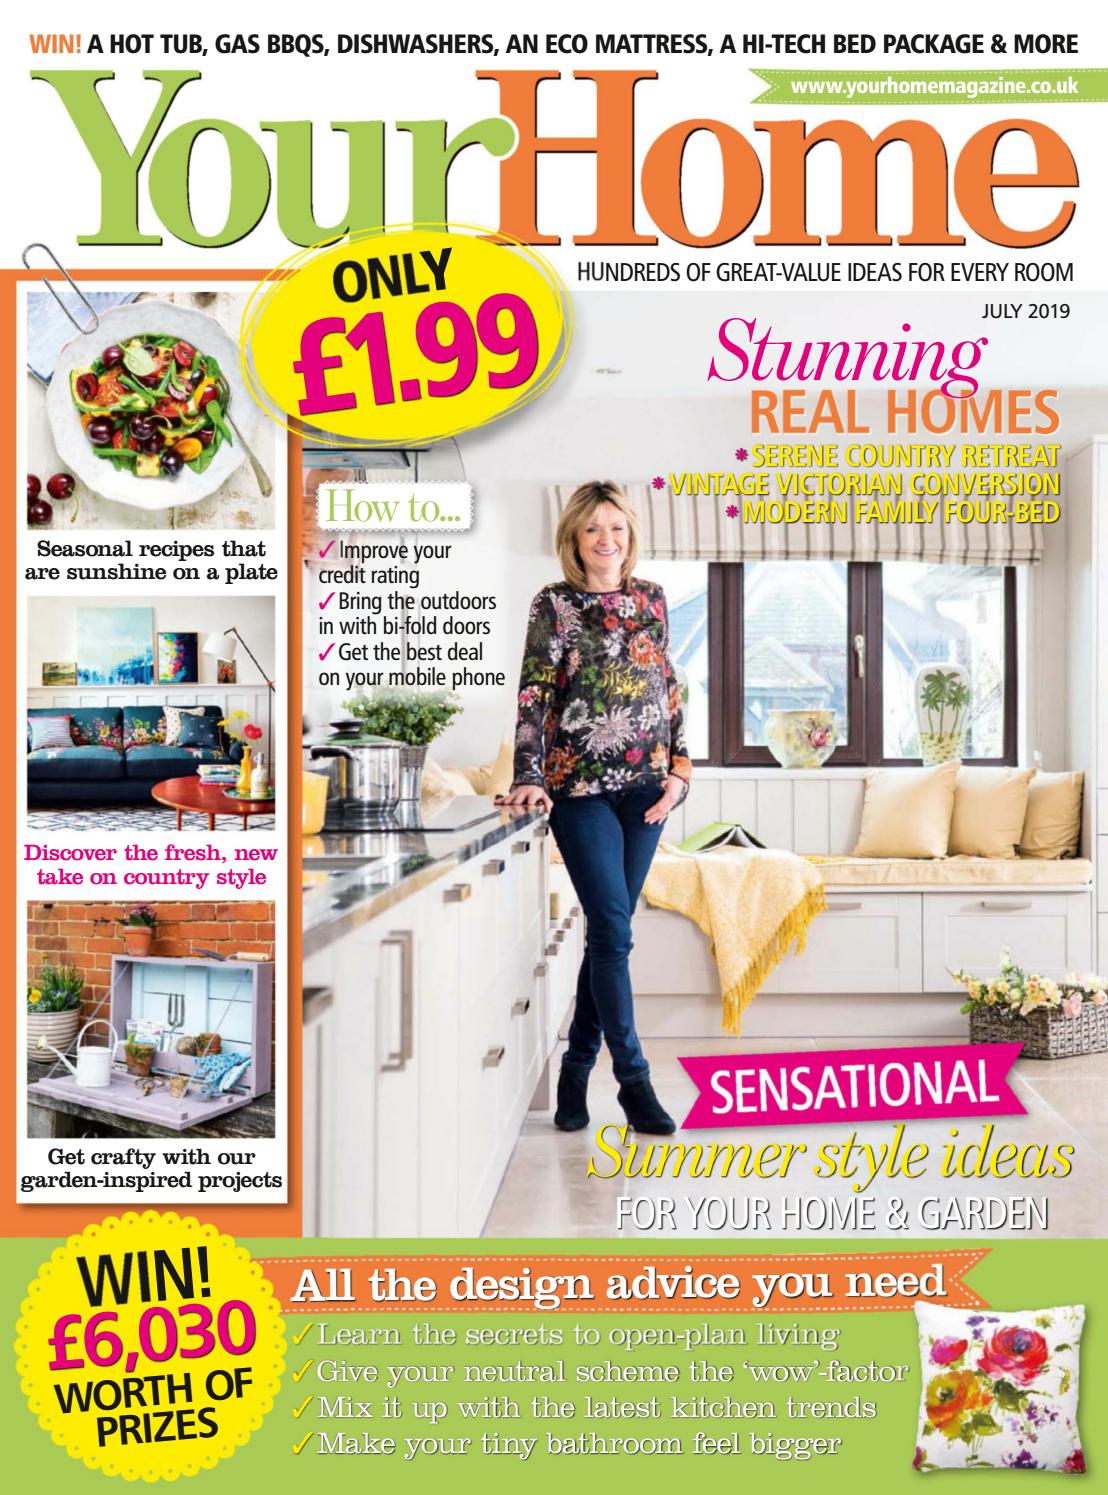 Your Home Magazine July 2019 - HD Wallpaper 